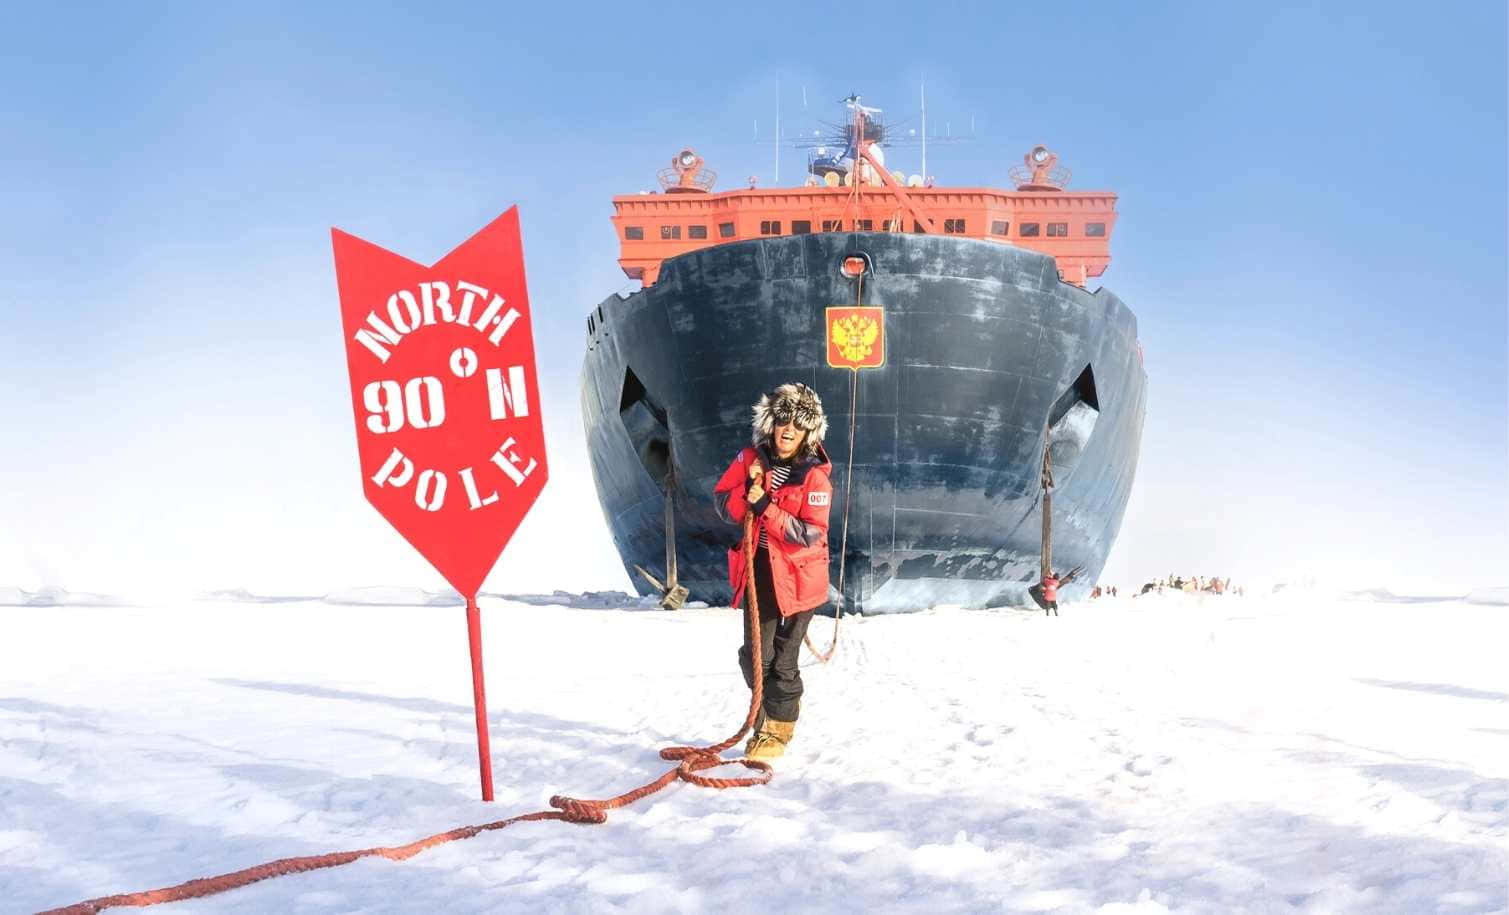 A Woman Is Standing Next To A Ship In The Snow